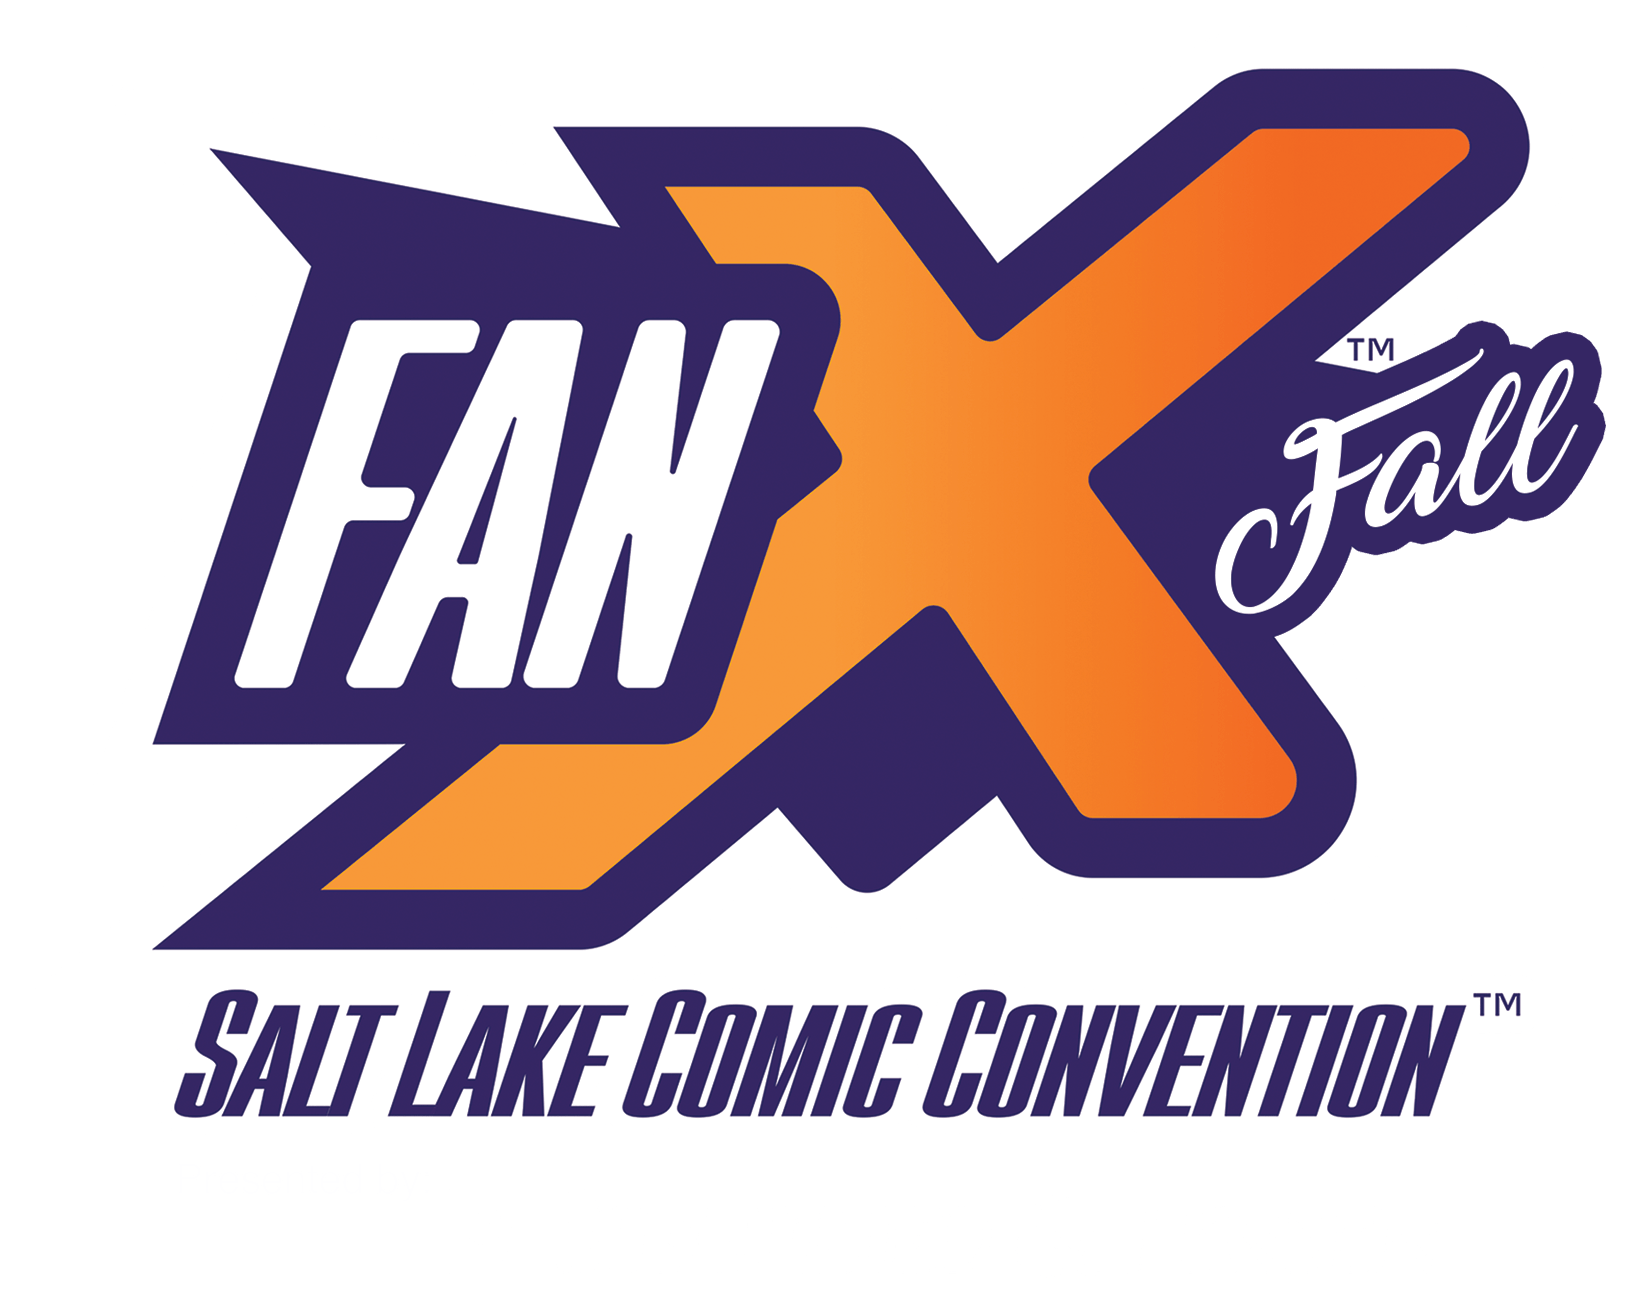 Nerds and Beyond: FanX Salt Lake Comic Convention: Spider-Man Creates a Buzz in the Beehive State